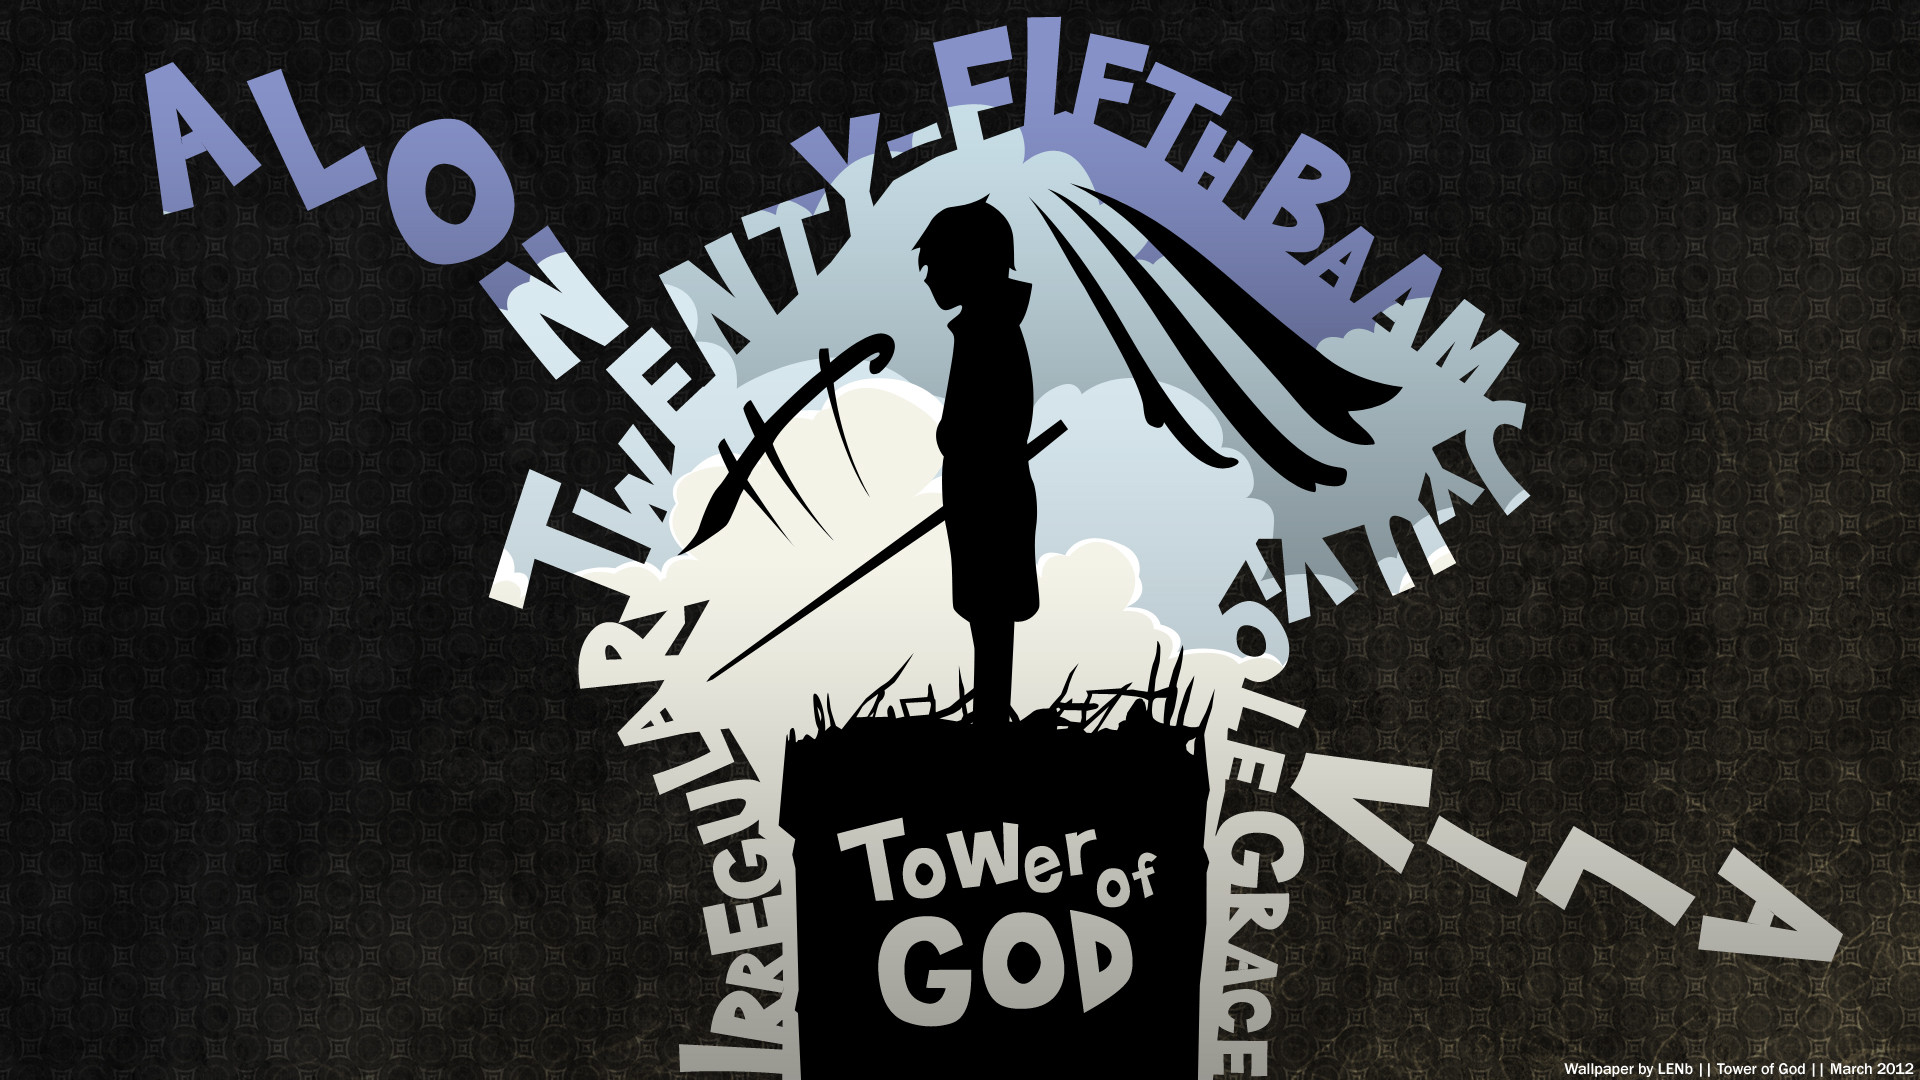 1920x1080 Tower of God download Tower of God image